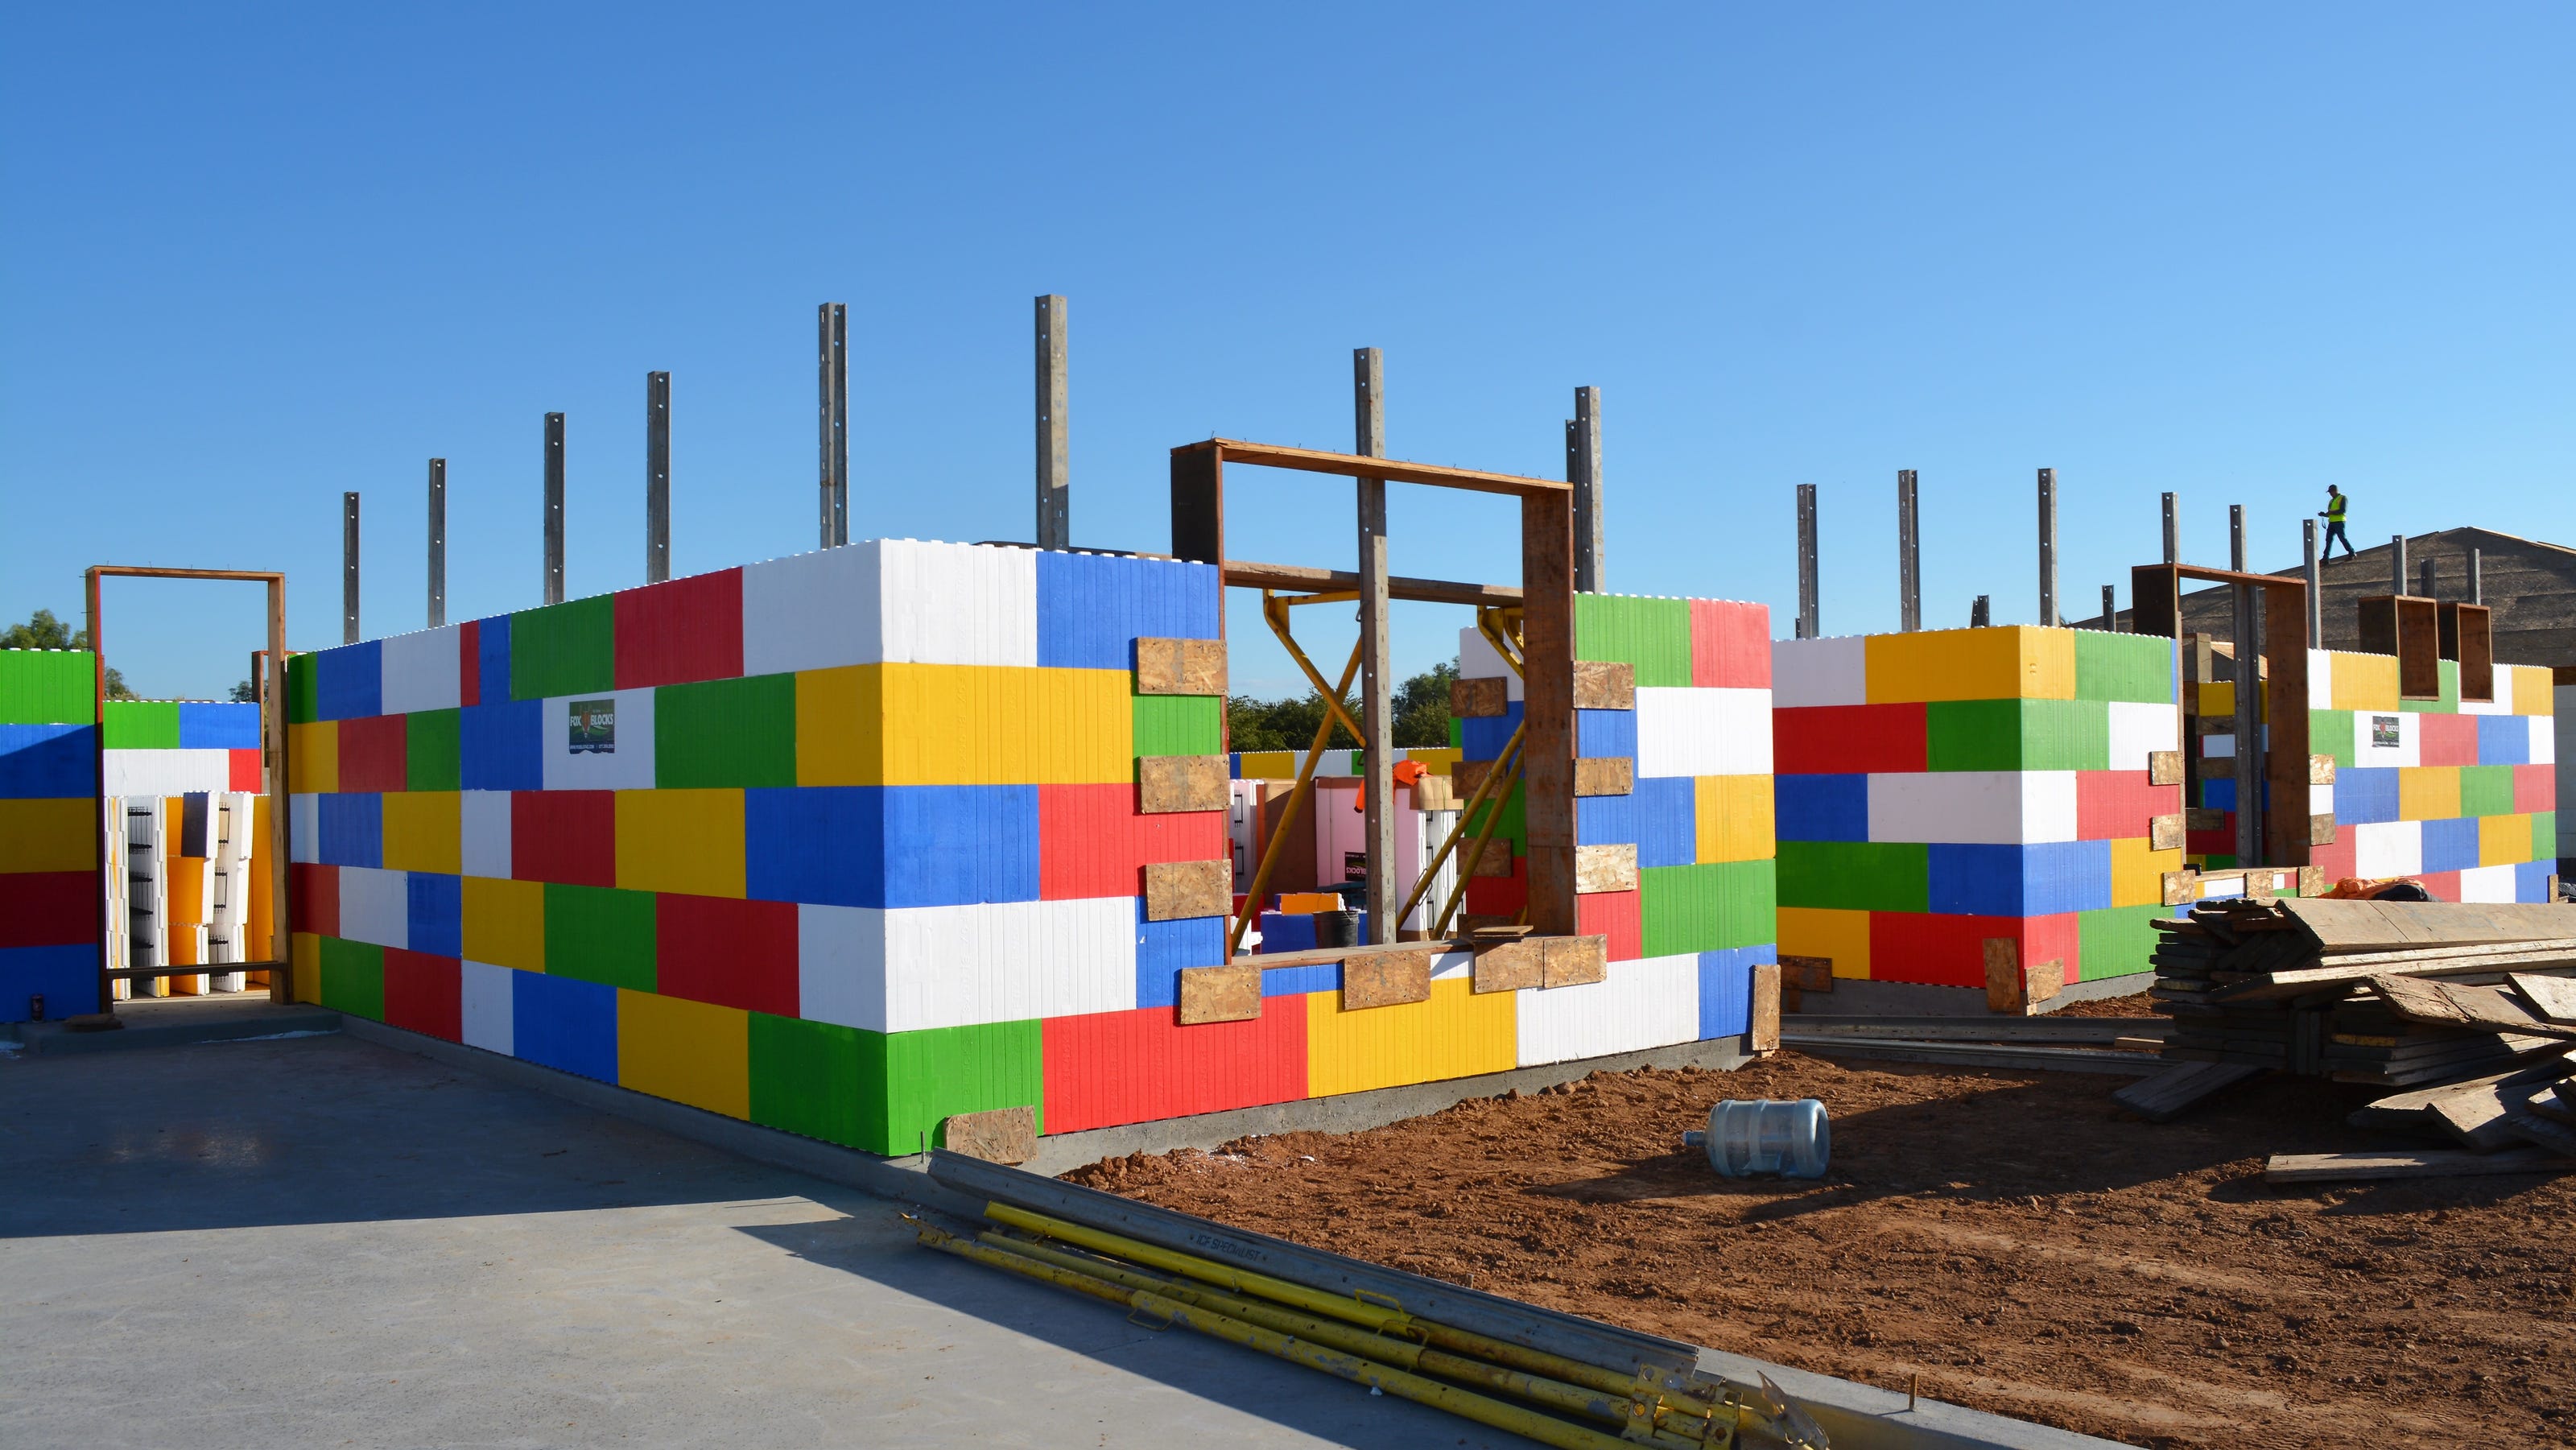 Lego-like in Waddell nears completion